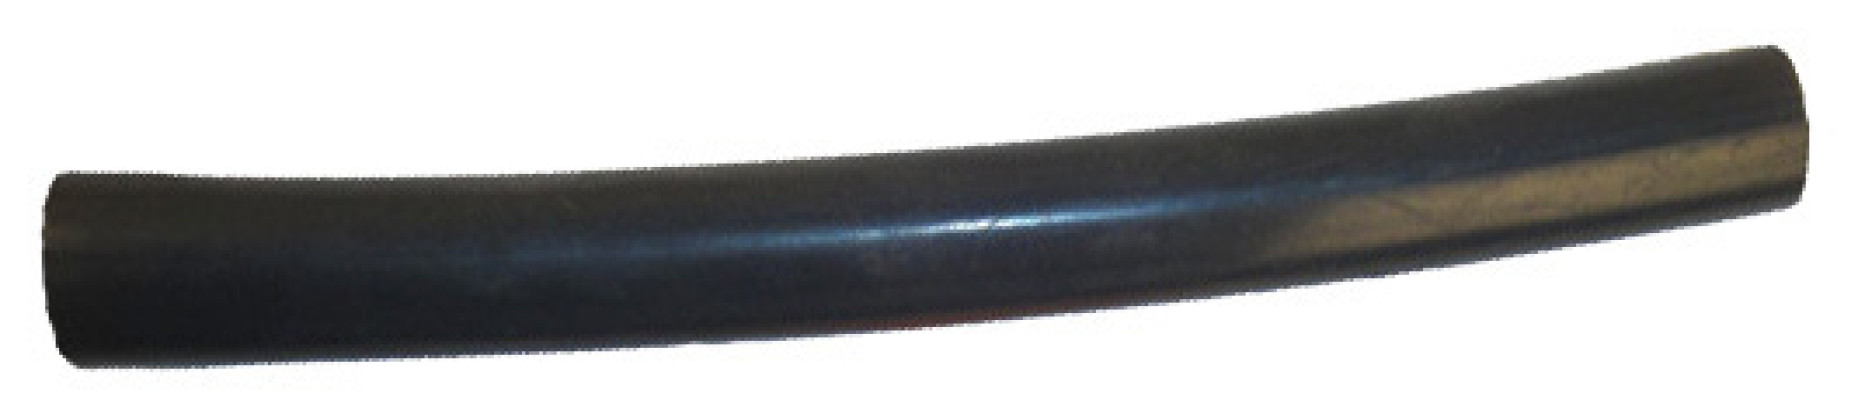 Image of A/C Compressor Clutch Connector from Sunair. Part number: PT-7004